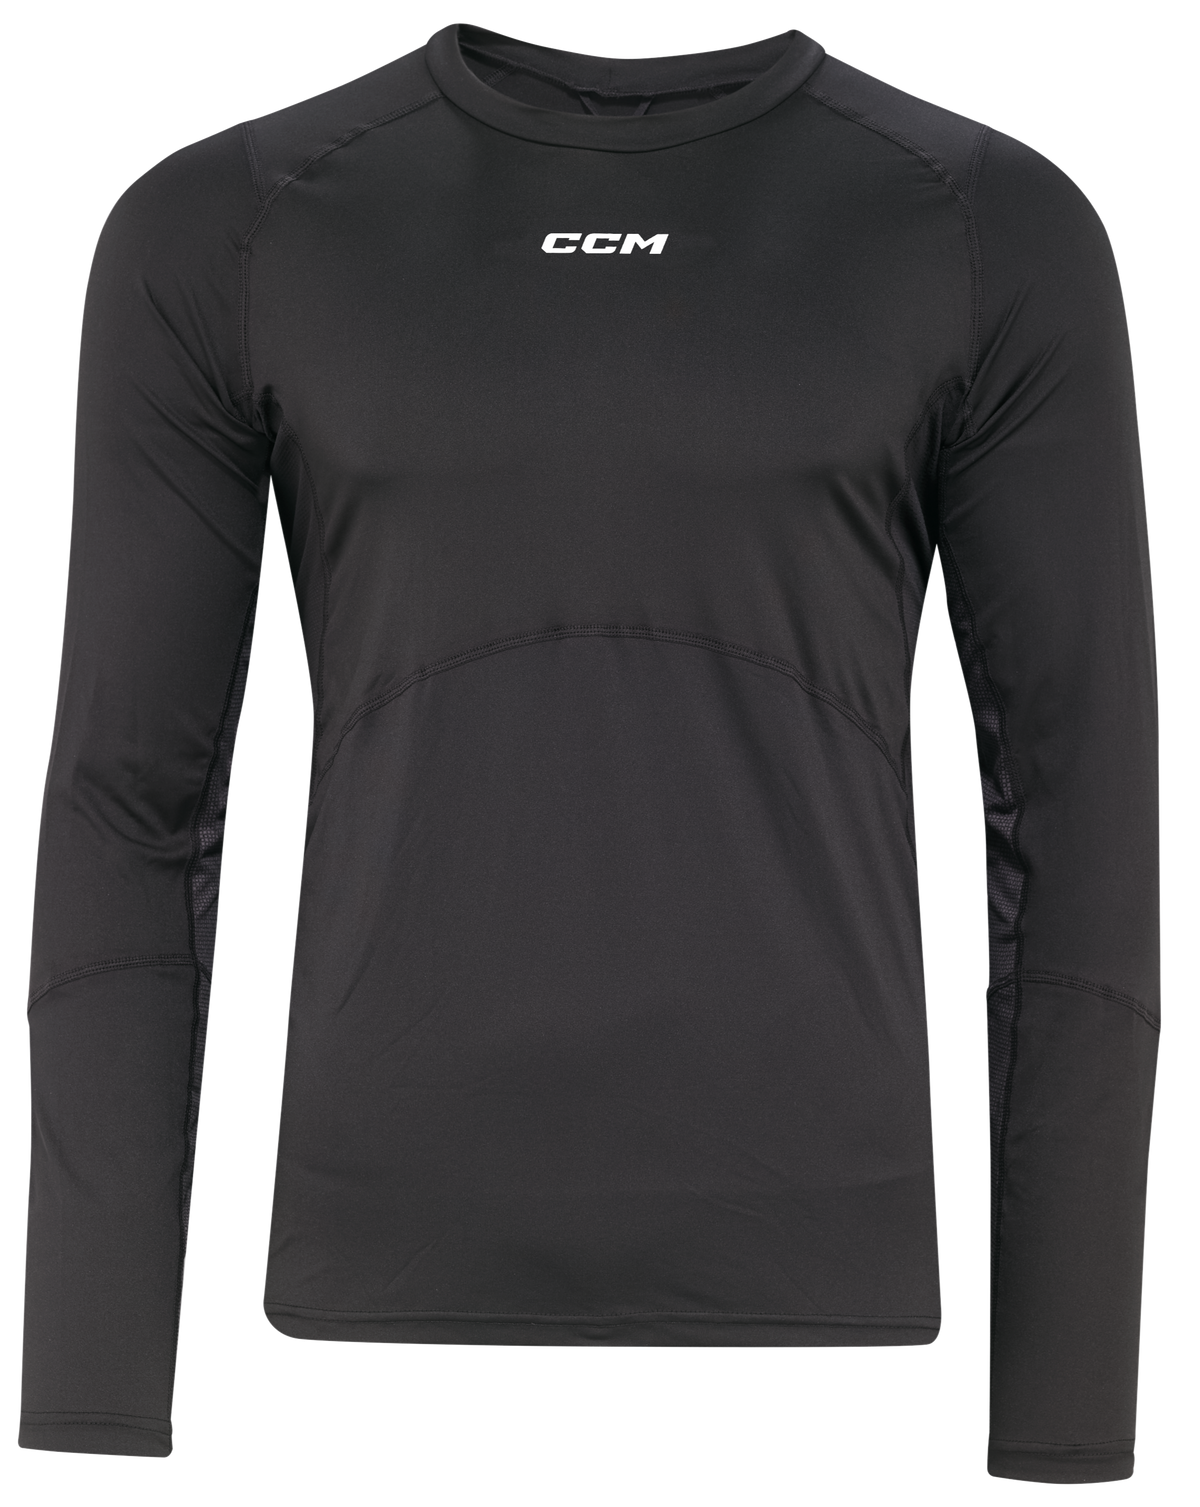 CCM Compression Long Sleeve with Gel Top Adult